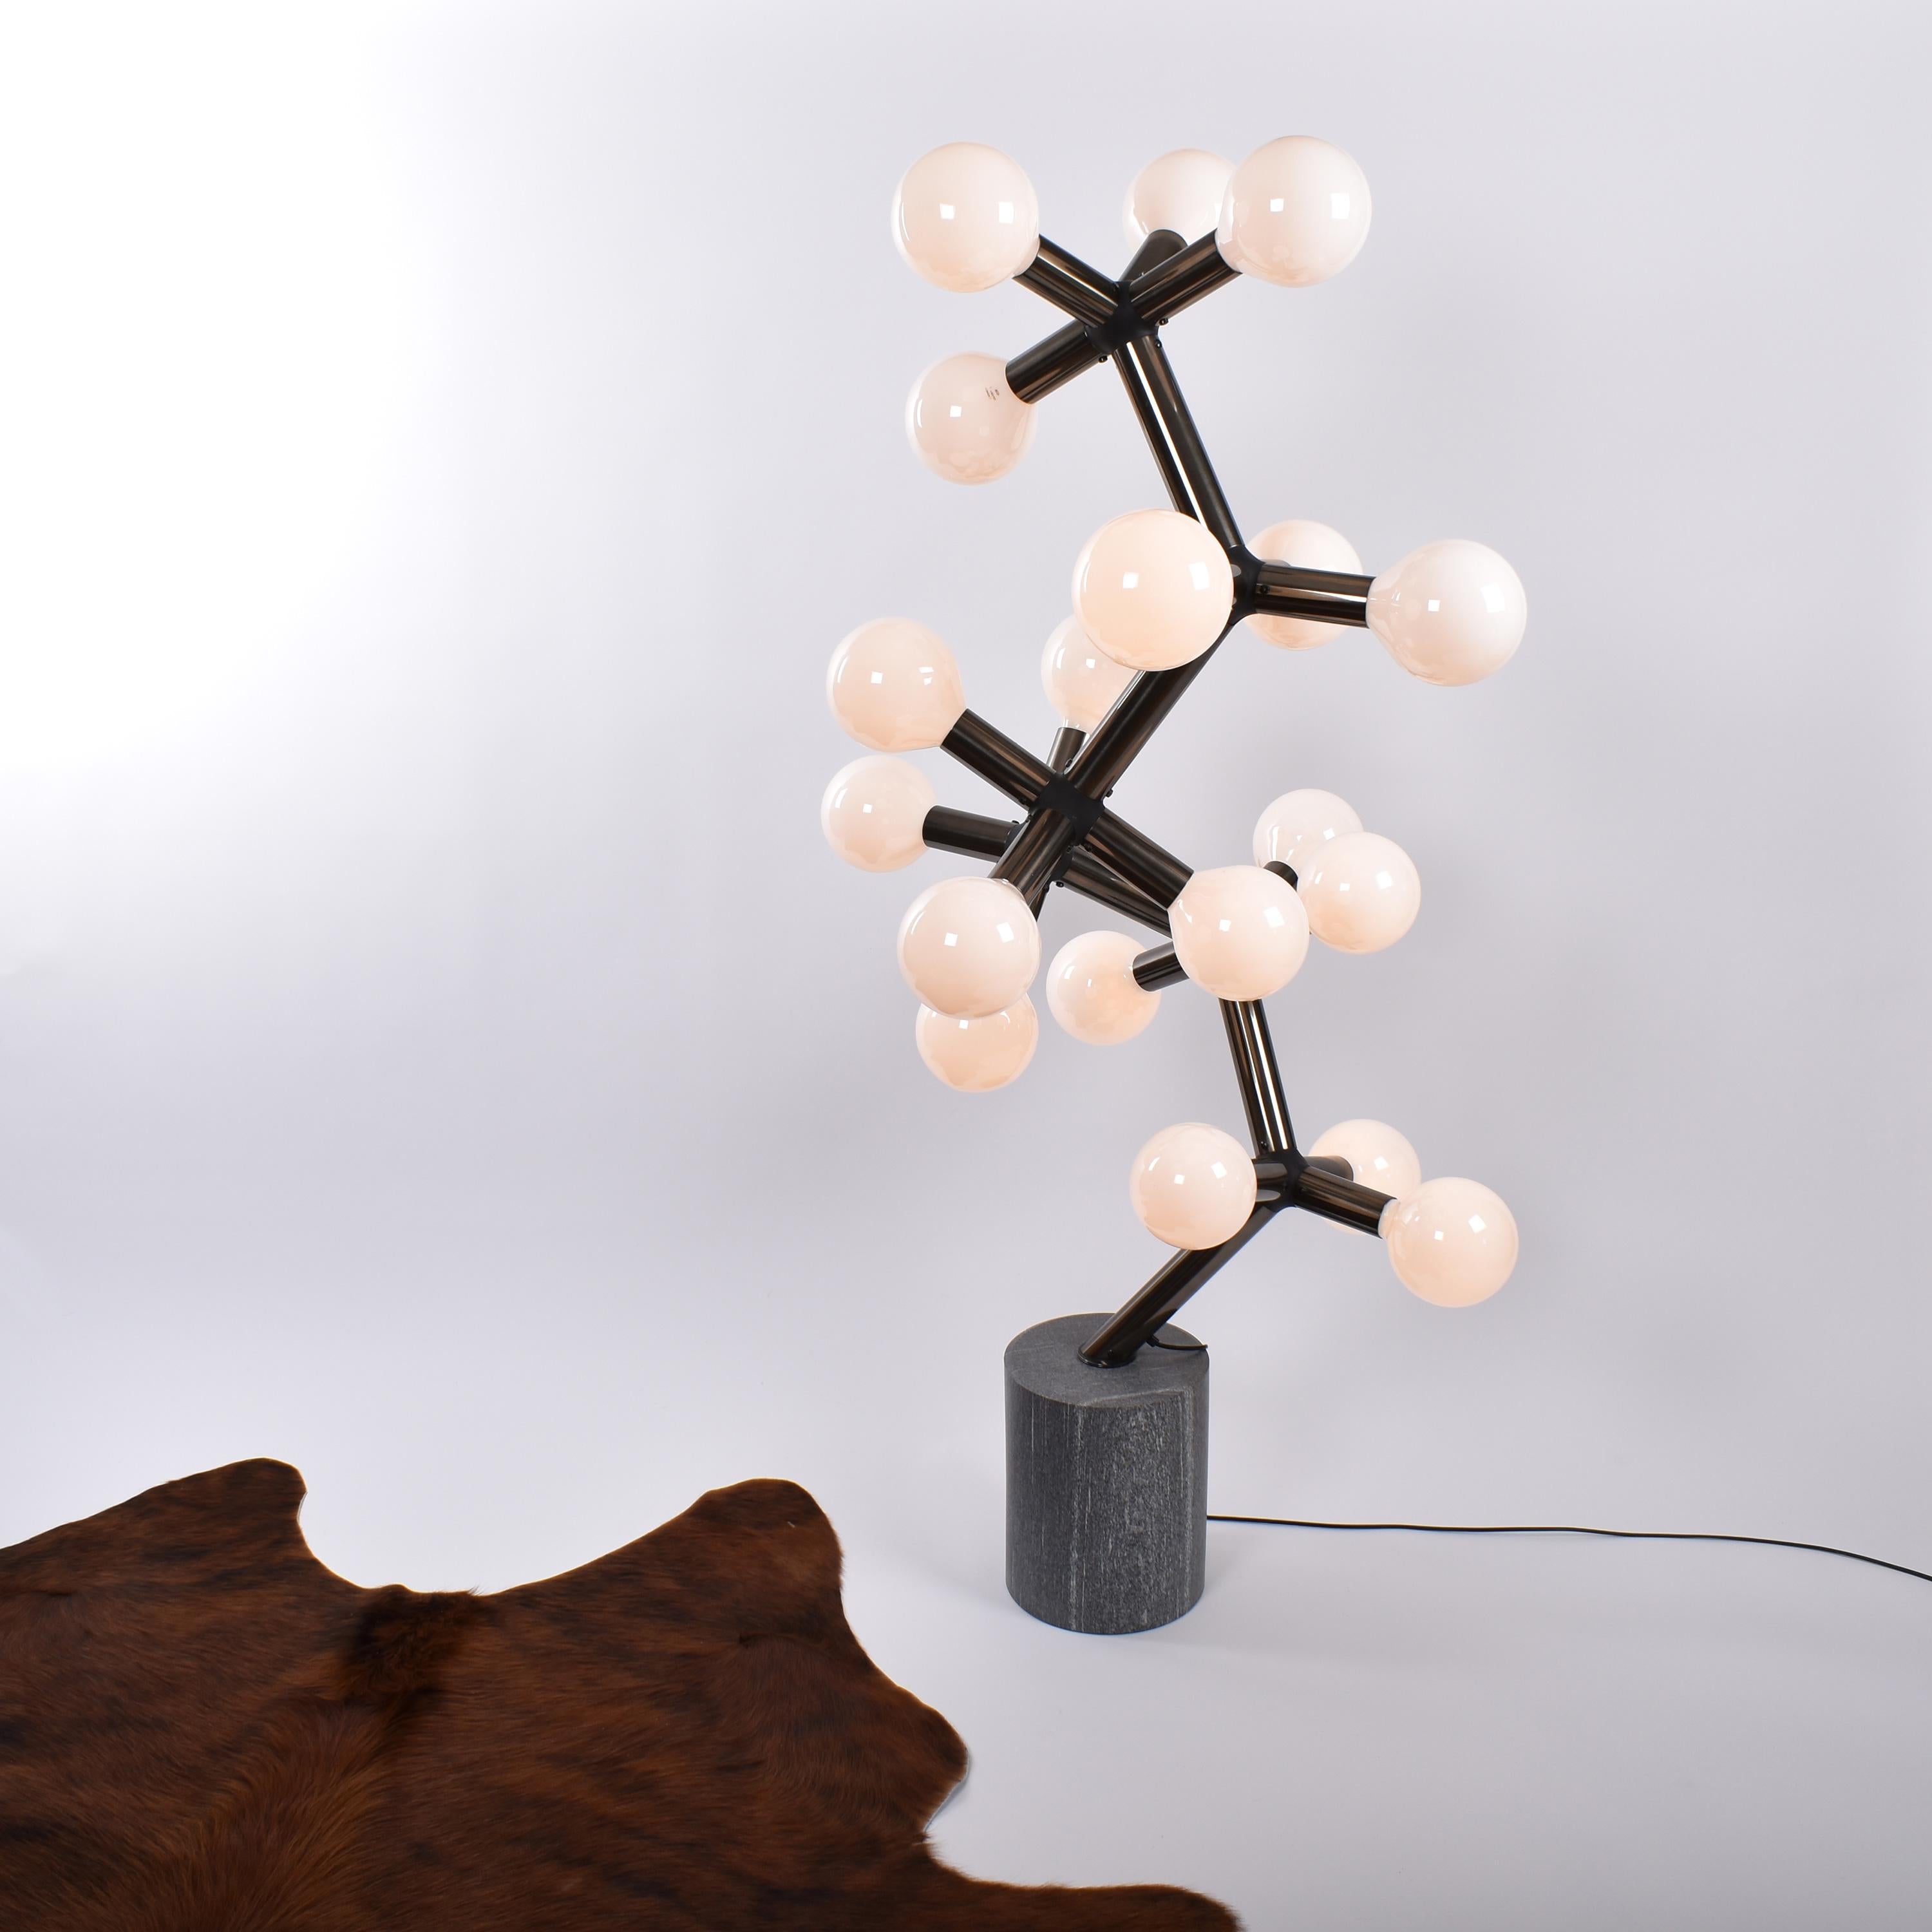 Exceptional Atomic floor lamp, designed by Trix and Robert Haussmann for Swisslamps international.
The molecular structure, made of bronzed aluminium, holds nineteen bulbs. 
It is inserted in a cylindric granite foot.
The whole piece shows